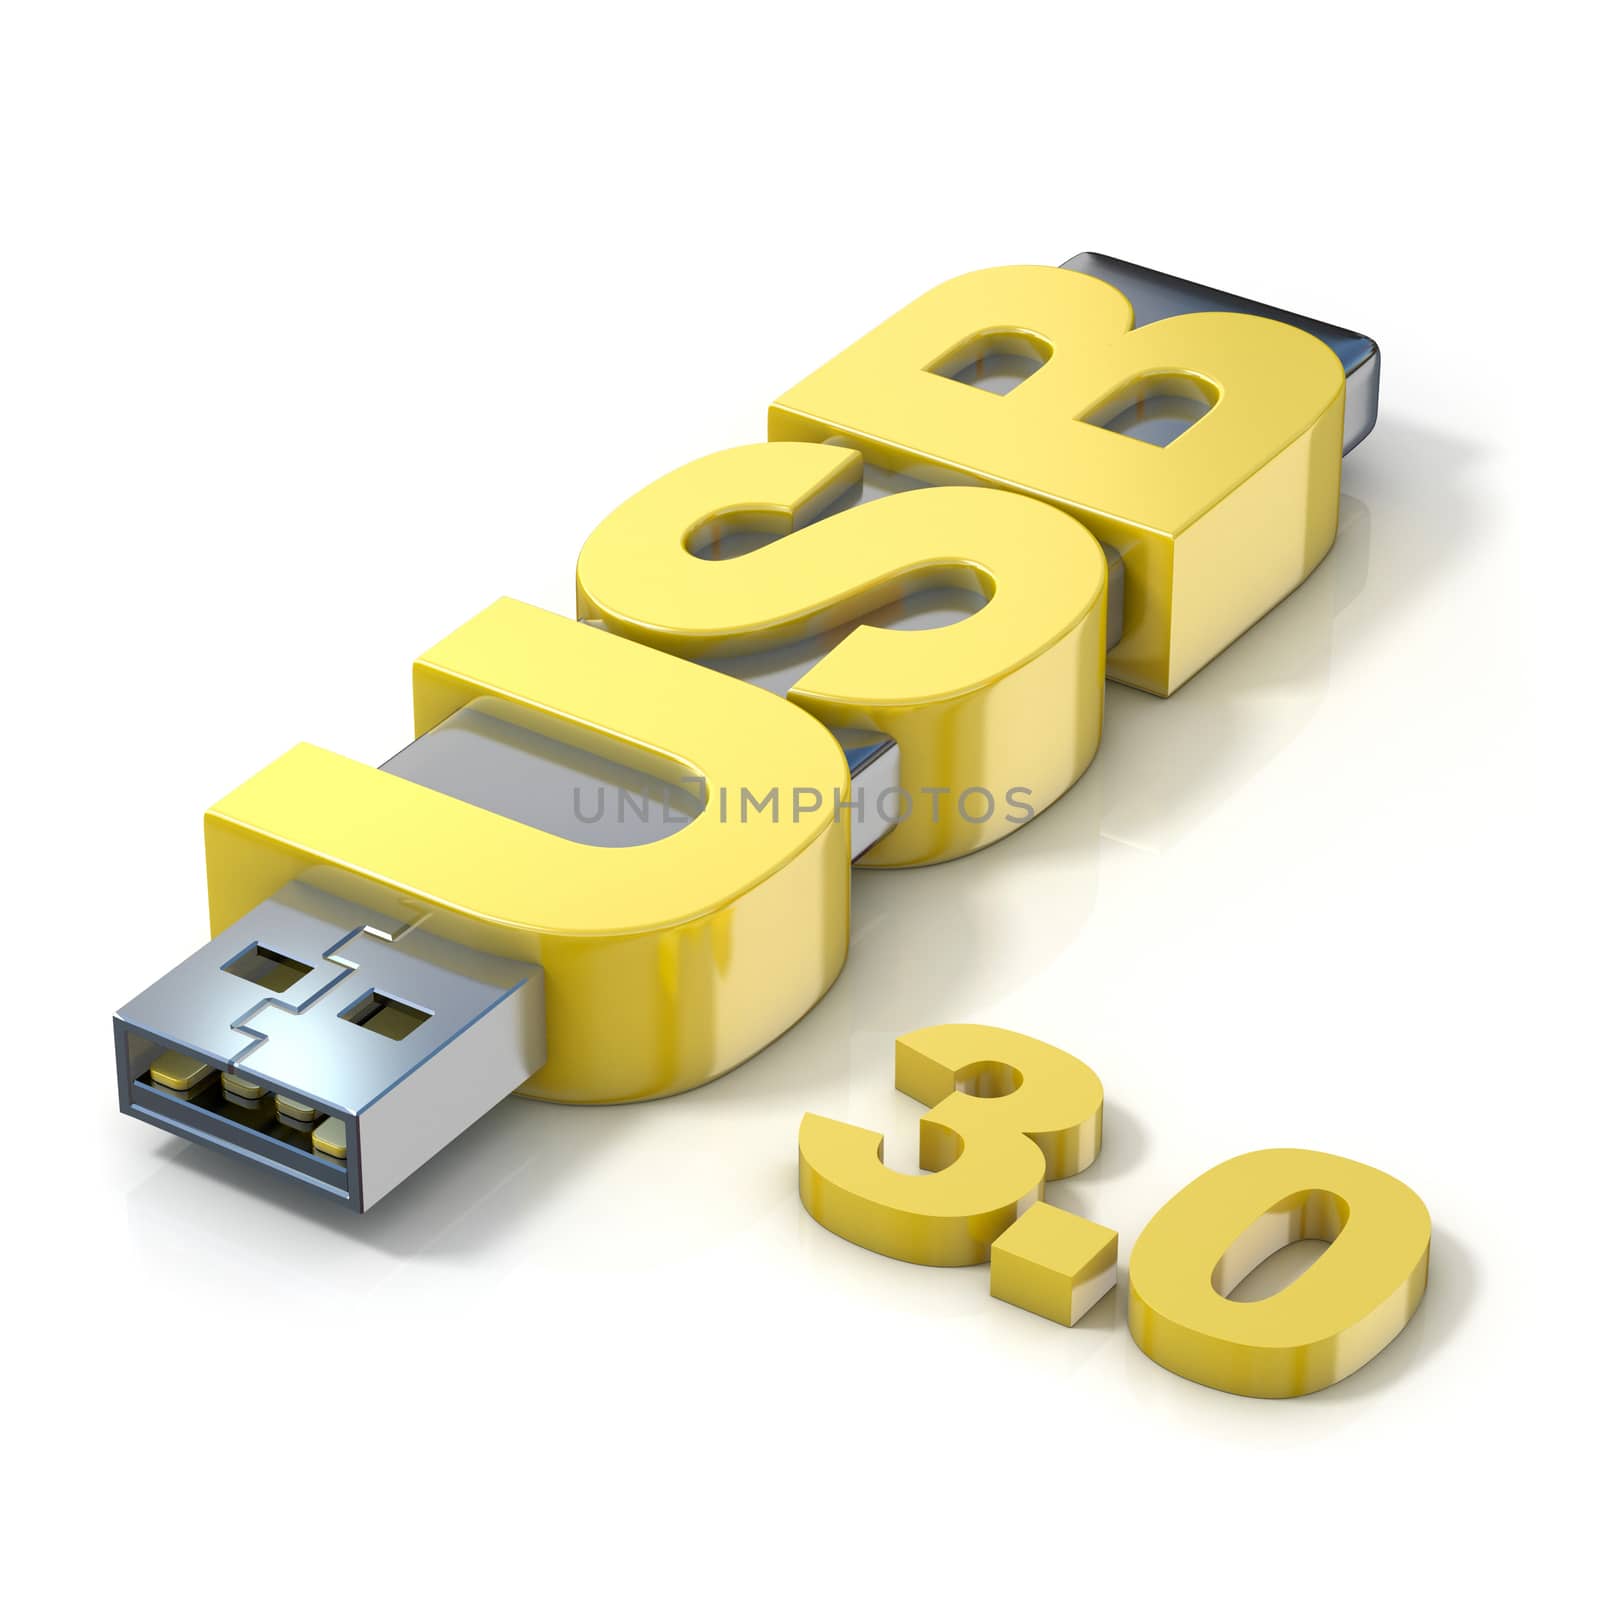 USB flash memory 3.0, made with the word USB. 3D by djmilic